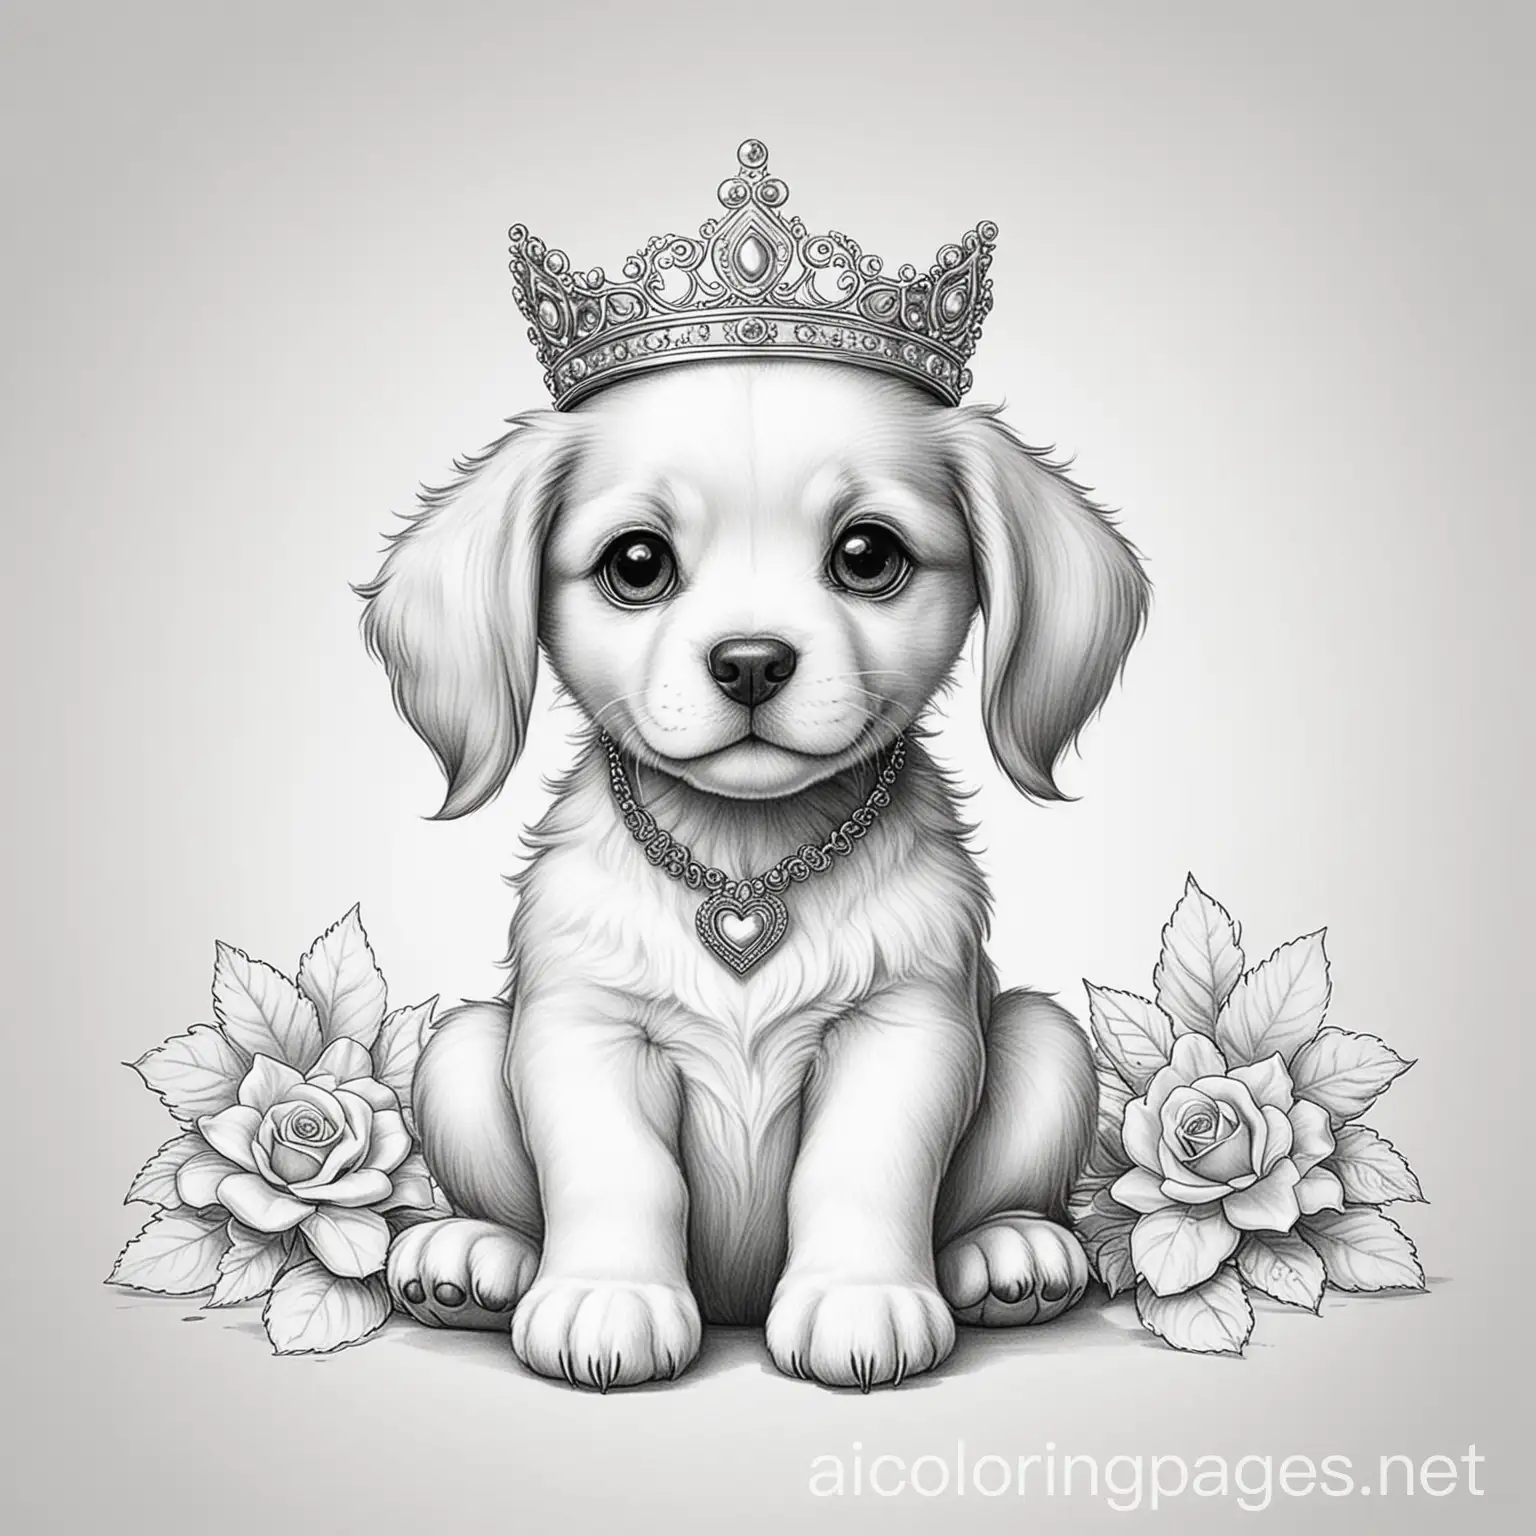 puppy princess, Coloring Page, black and white, line art, white background, Simplicity, Ample White Space. The background of the coloring page is plain white to make it easy for young children to color within the lines. The outlines of all the subjects are easy to distinguish, making it simple for kids to color without too much difficulty